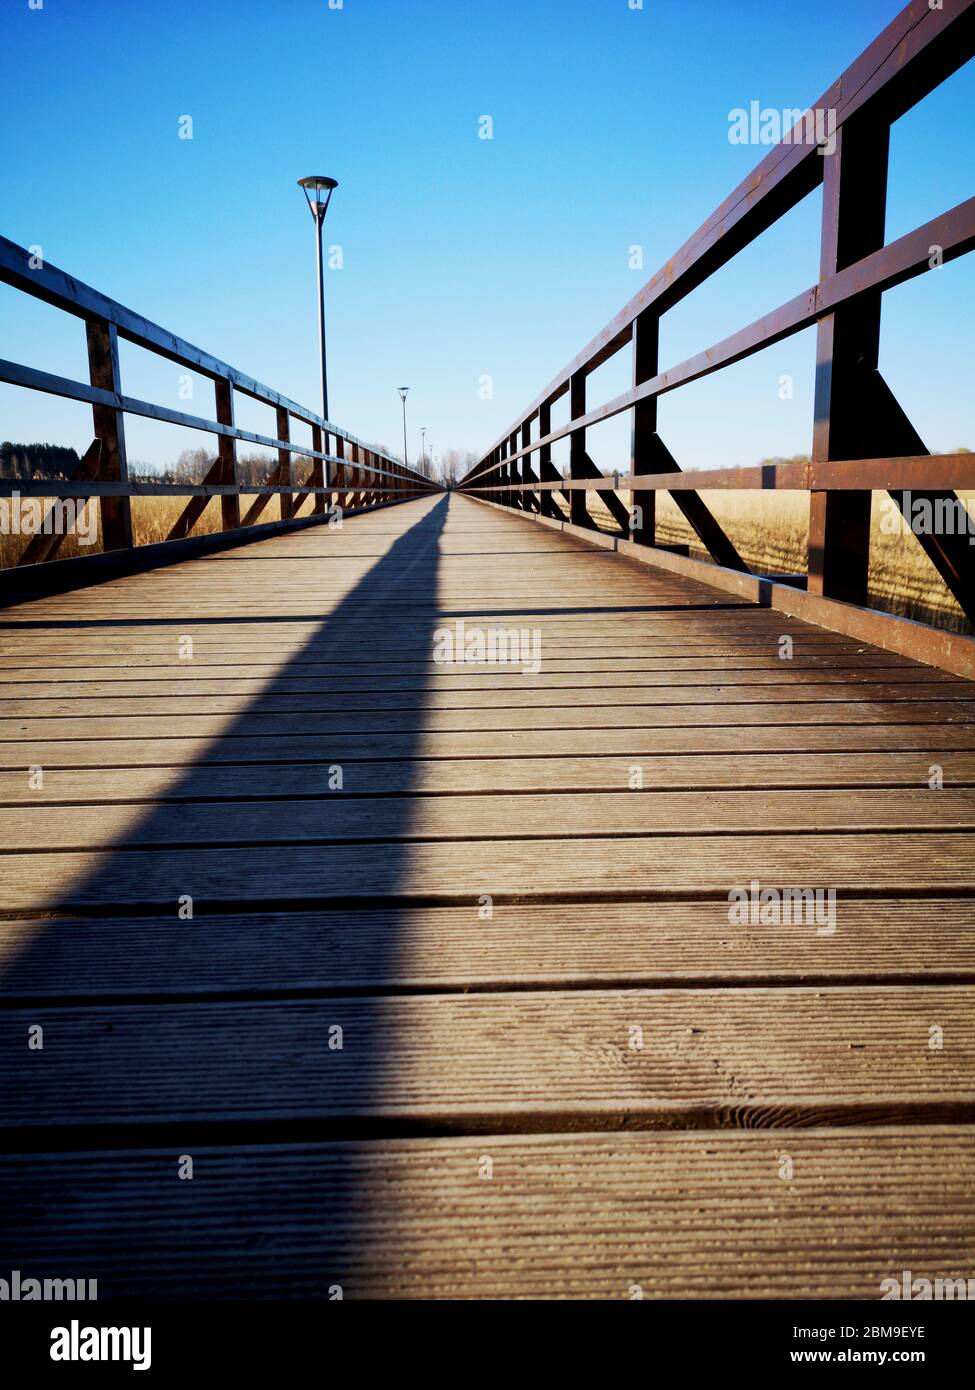 Empty new wooden bridge with lamps and fence shadow Stock Photo